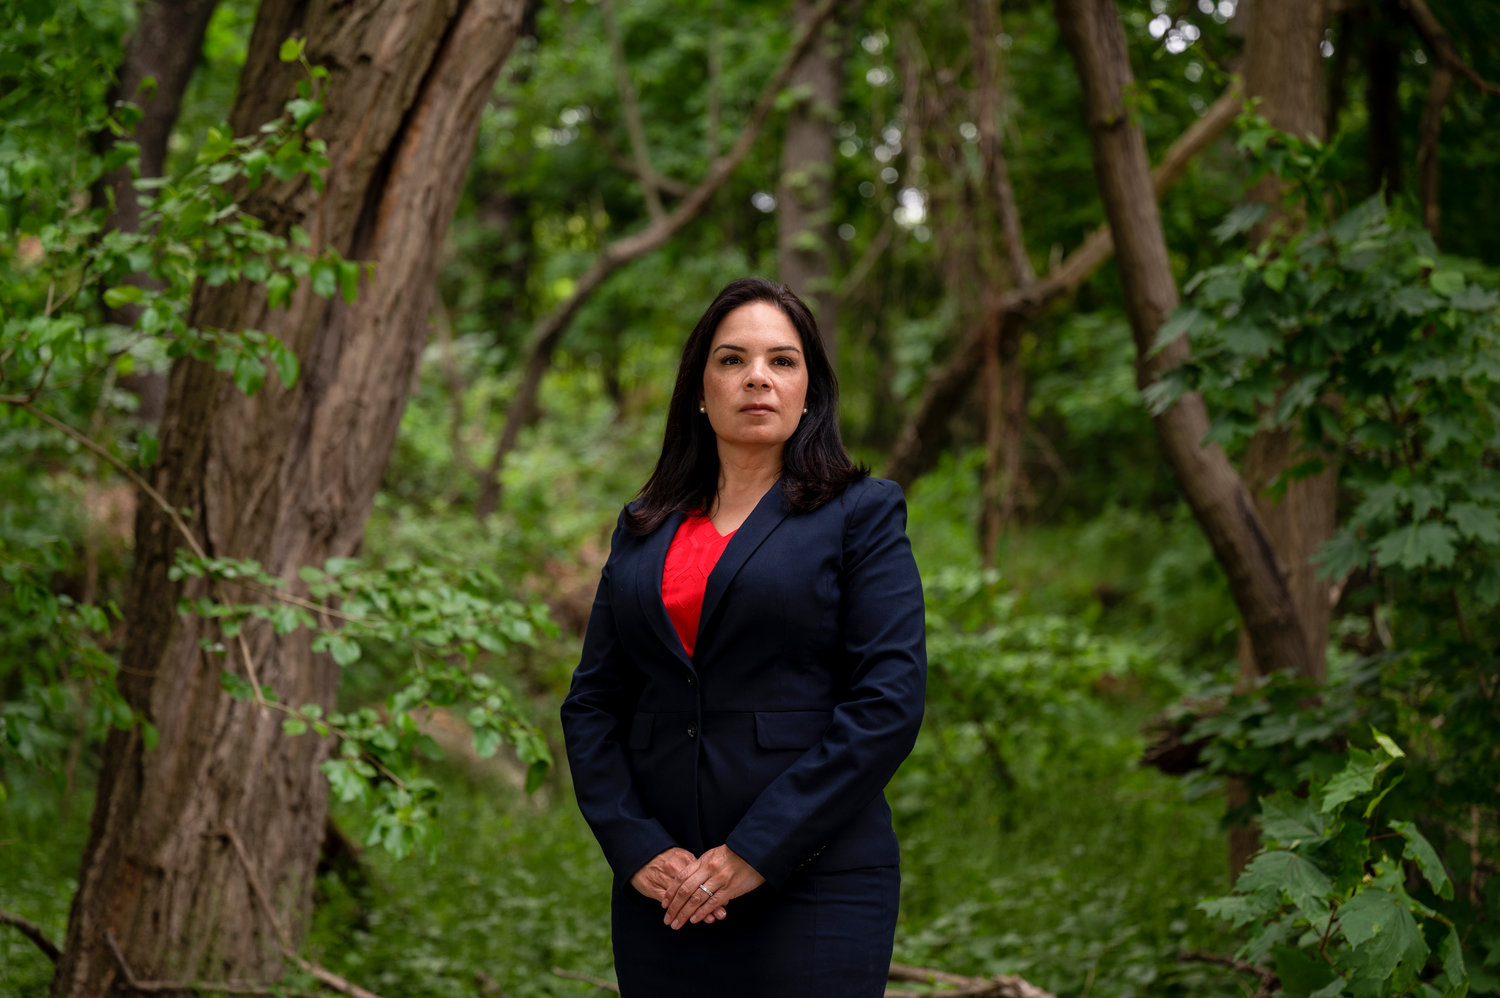 Jessica Flores says she’s running to be a civil court judge for the west side of the Bronx because she believes judges should reflect the communities they serve. Flores is running against four others in a June 22 Democratic primary over two open judgeships.